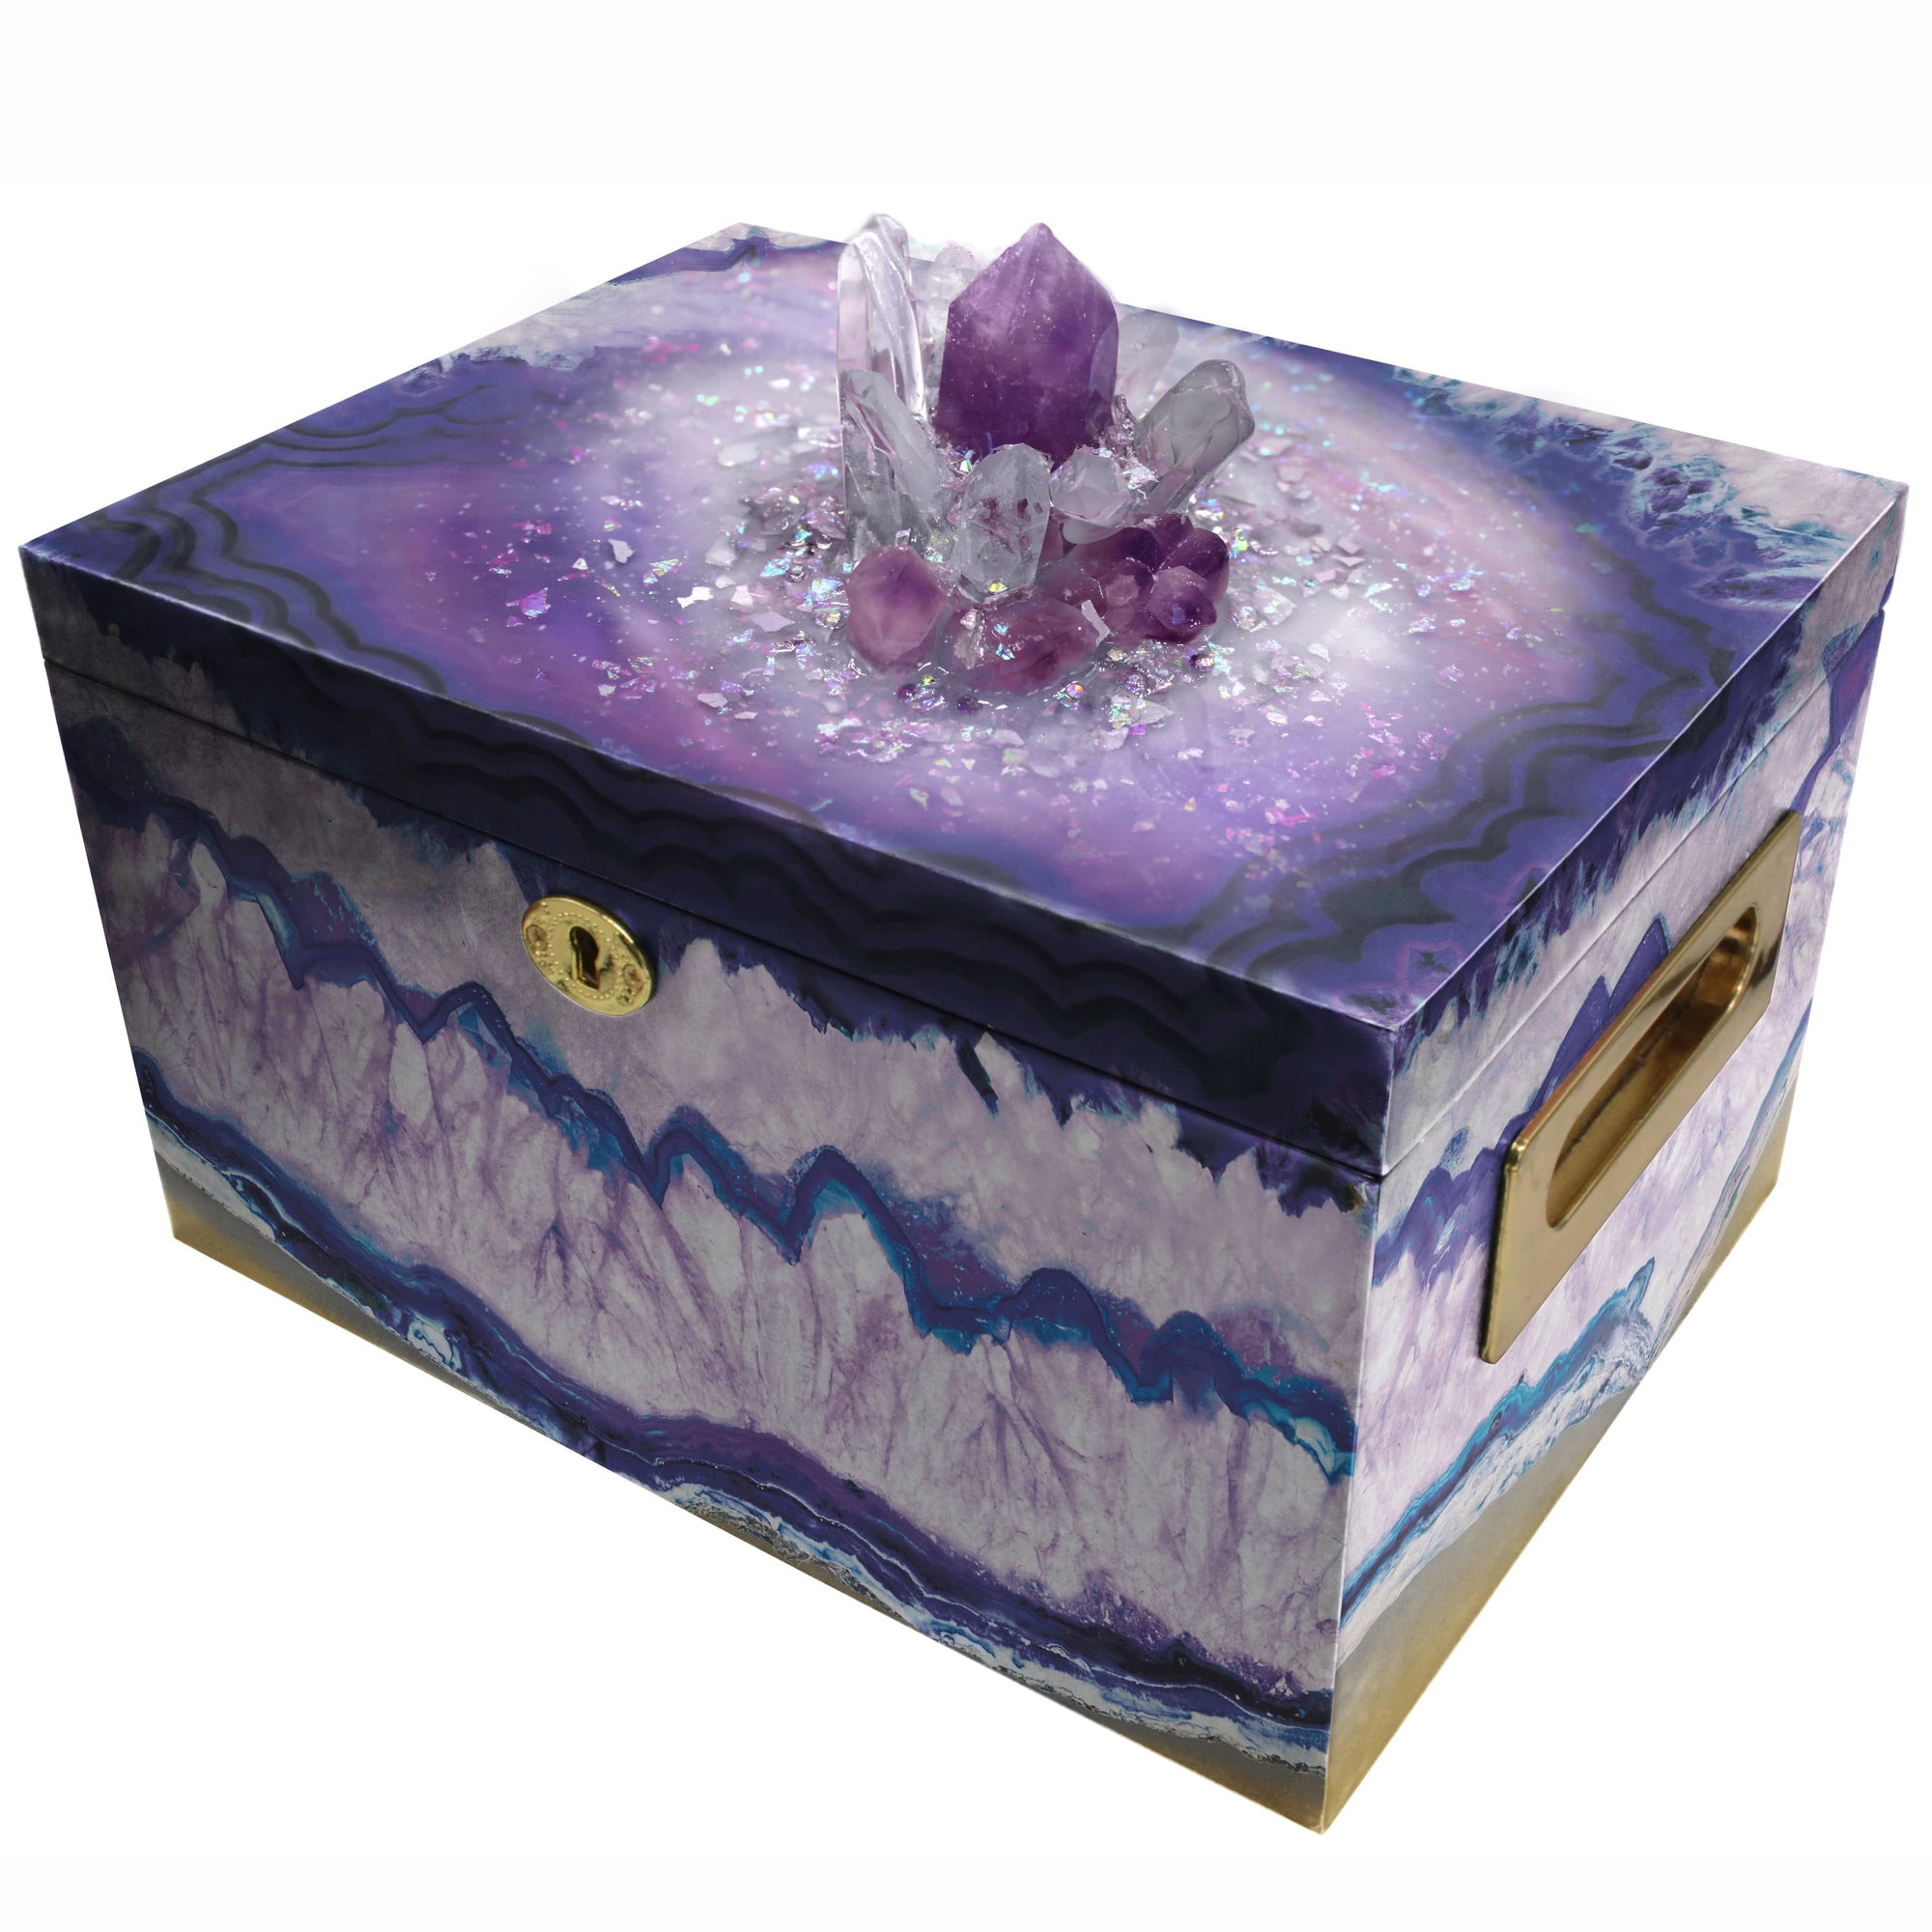 Commemorative Cremation Urns Urn Collection Chest Purple Agate Crystal Memorial Chest with Genuine Amethyst and Rose Quartz Cremation Urn